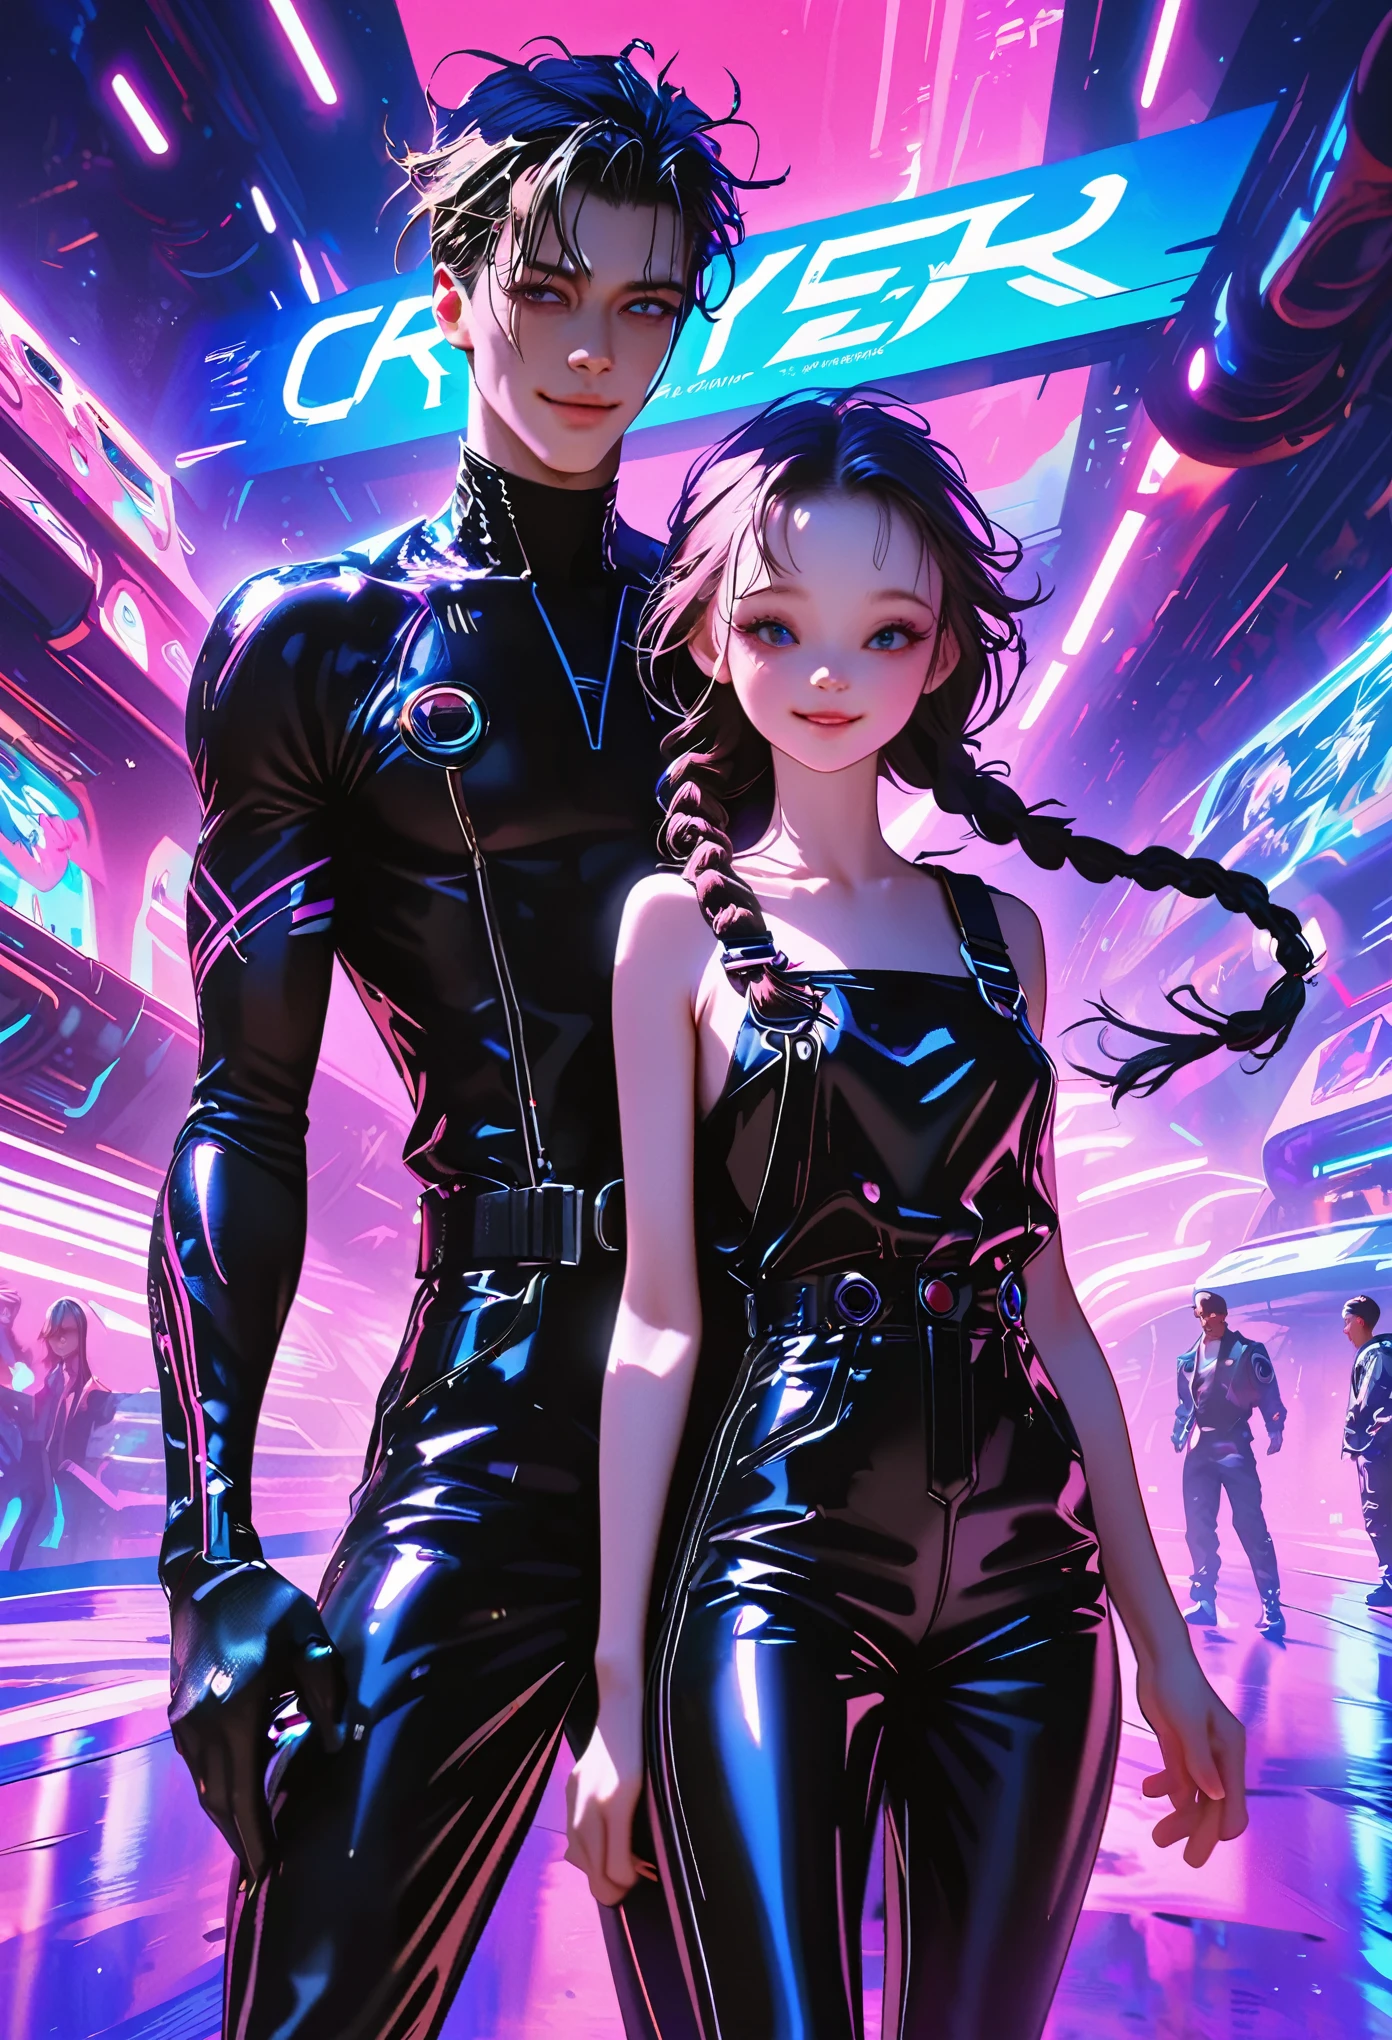 ((Picture in cyber punk style, create two characters), (futuristic , space station, space)))_((In the center of the composition there are two characters, close-up, a boy and a girl - full growth), (a girl in a stylish overalls, a slender figure, dynamic pose), (her clothes look very stylish, futuristic, a lot of details, latex material, textured fabric elements, colors, pink, blue, white), (her image embodies beauty and sympathy, her face radiates happiness, expressive eyes, smile), (her hairstyle, two long braids, hair dyed blue, pink - neon highlights))_((Her partner, a futuristic boy from the future, is dressed in all black, his preference in clothing, dark gothic style, combined with space jumpsuit, sporty stylish), (shoulder-length hair, handsome, black eyes, slender, young, strong body))_((Background, space station, space, technological elements, shine of stars))_((High image quality, stylish picture in cyber punk style, futuristic future, masterpiece), (animation cinematography, stylized realism, Japanese anime, blade runner, apple seed, animatrix), (FULL HD, 18K).